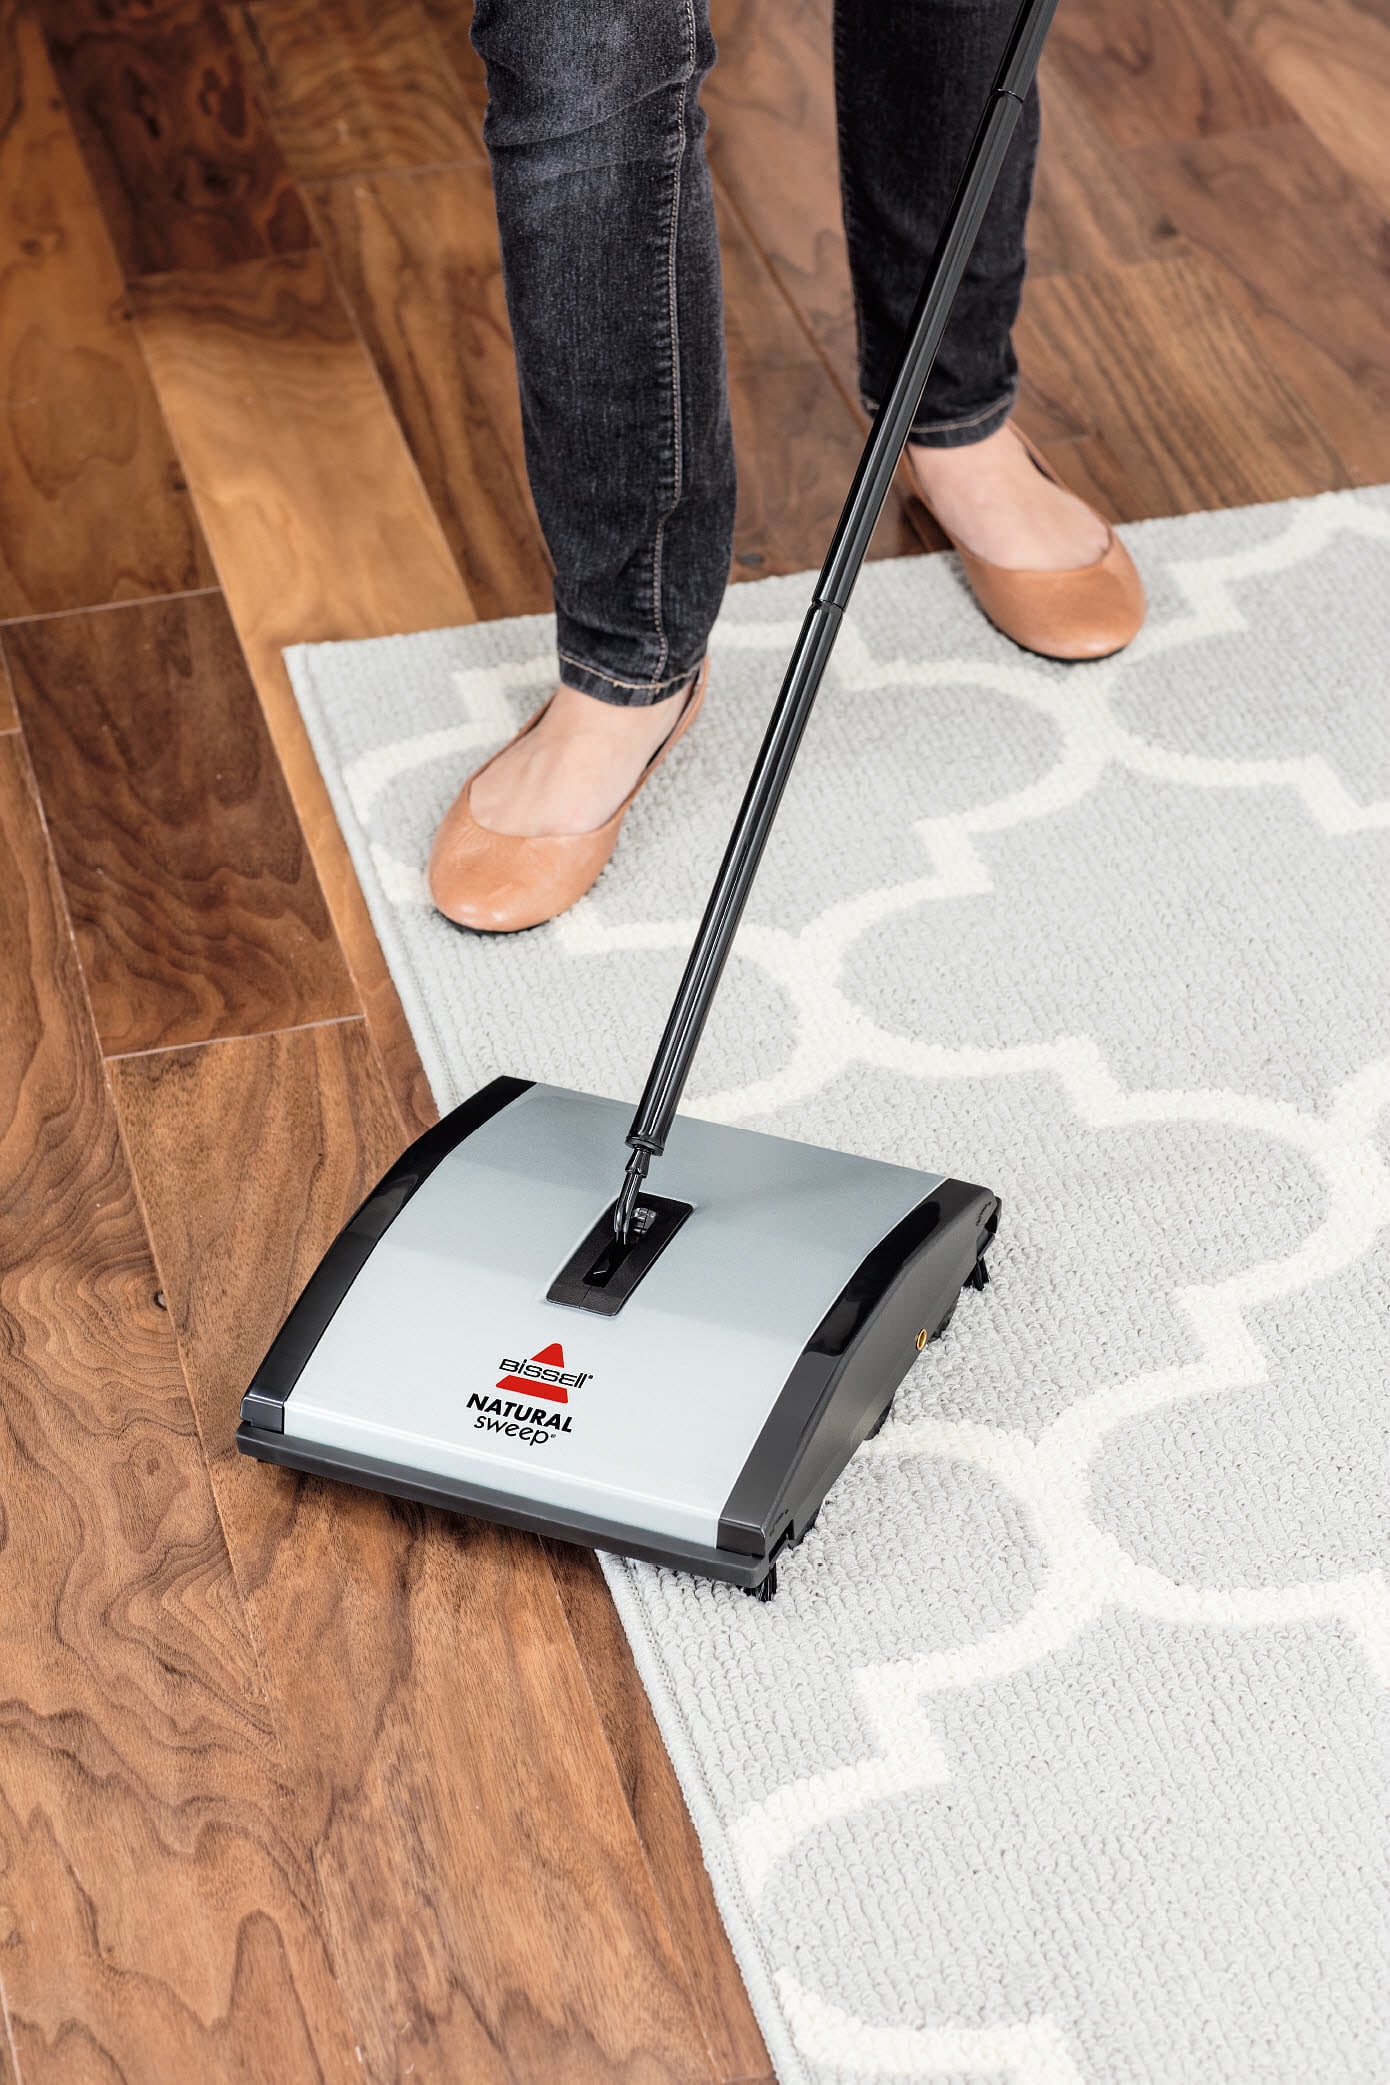 BISSELL Natural Sweep Carpet & Floor Manual Lightweight Sweeper92N0A New! 